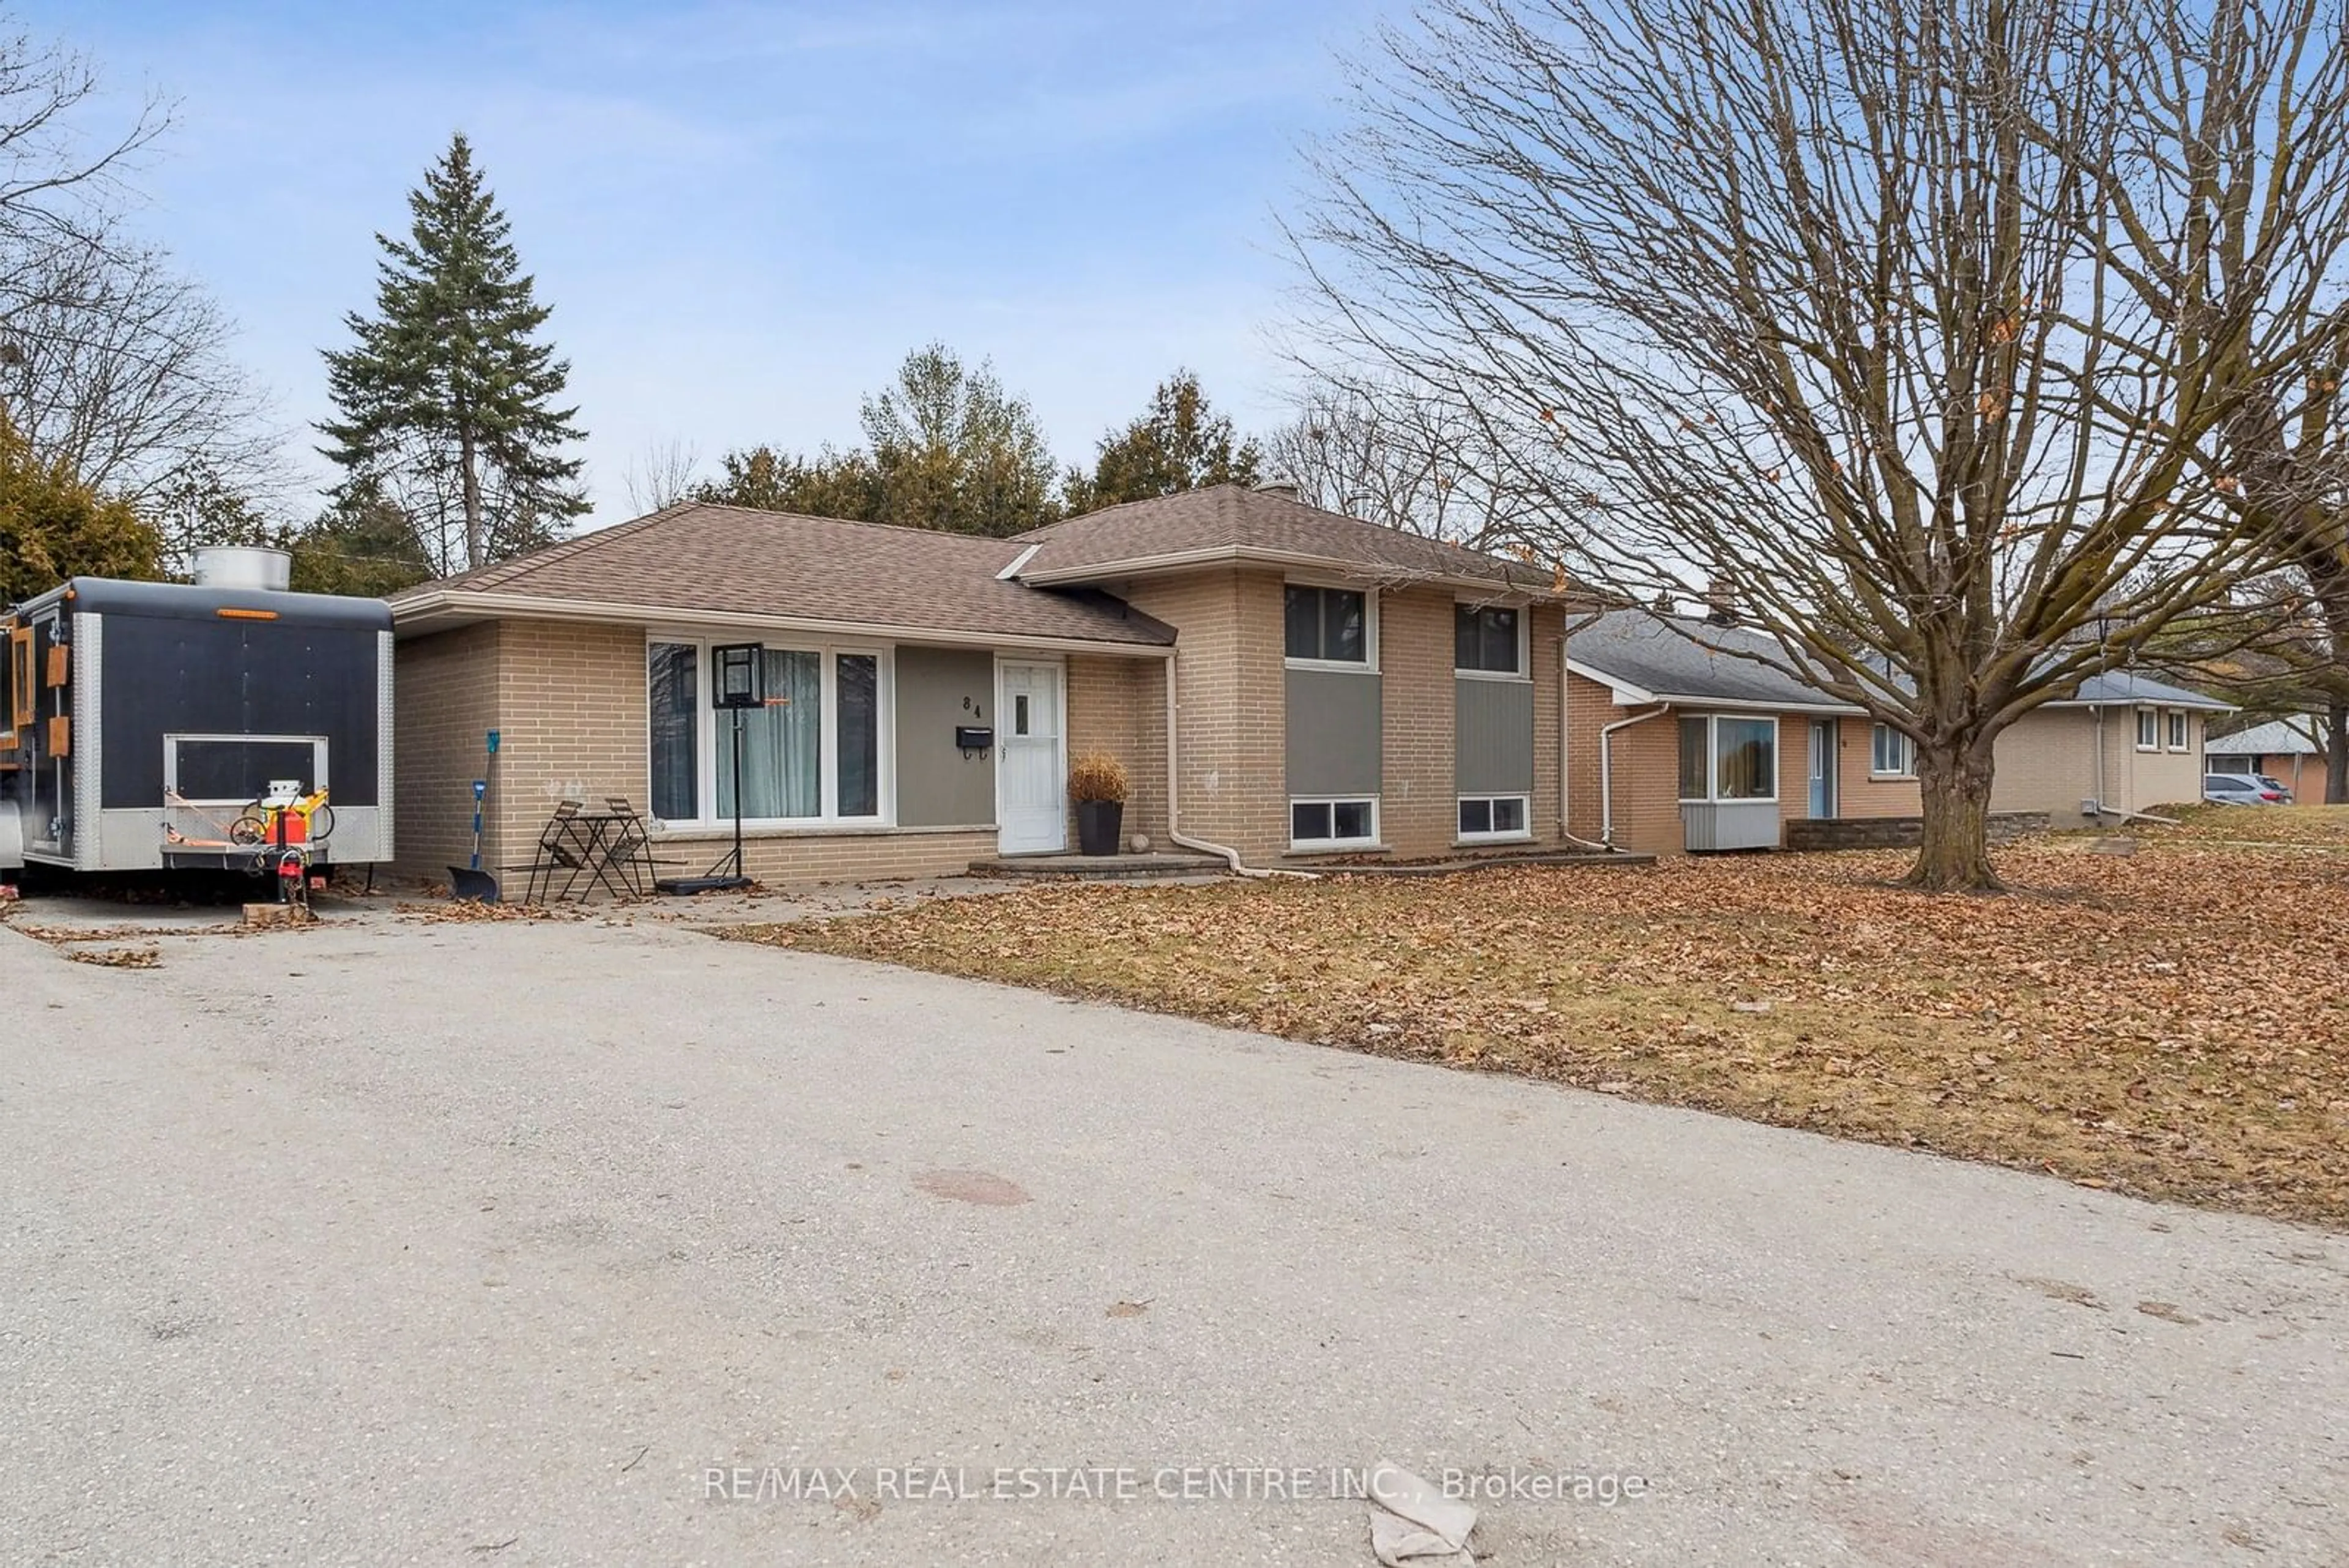 Frontside or backside of a home for 84 Rose St, Barrie Ontario L4M 2T2